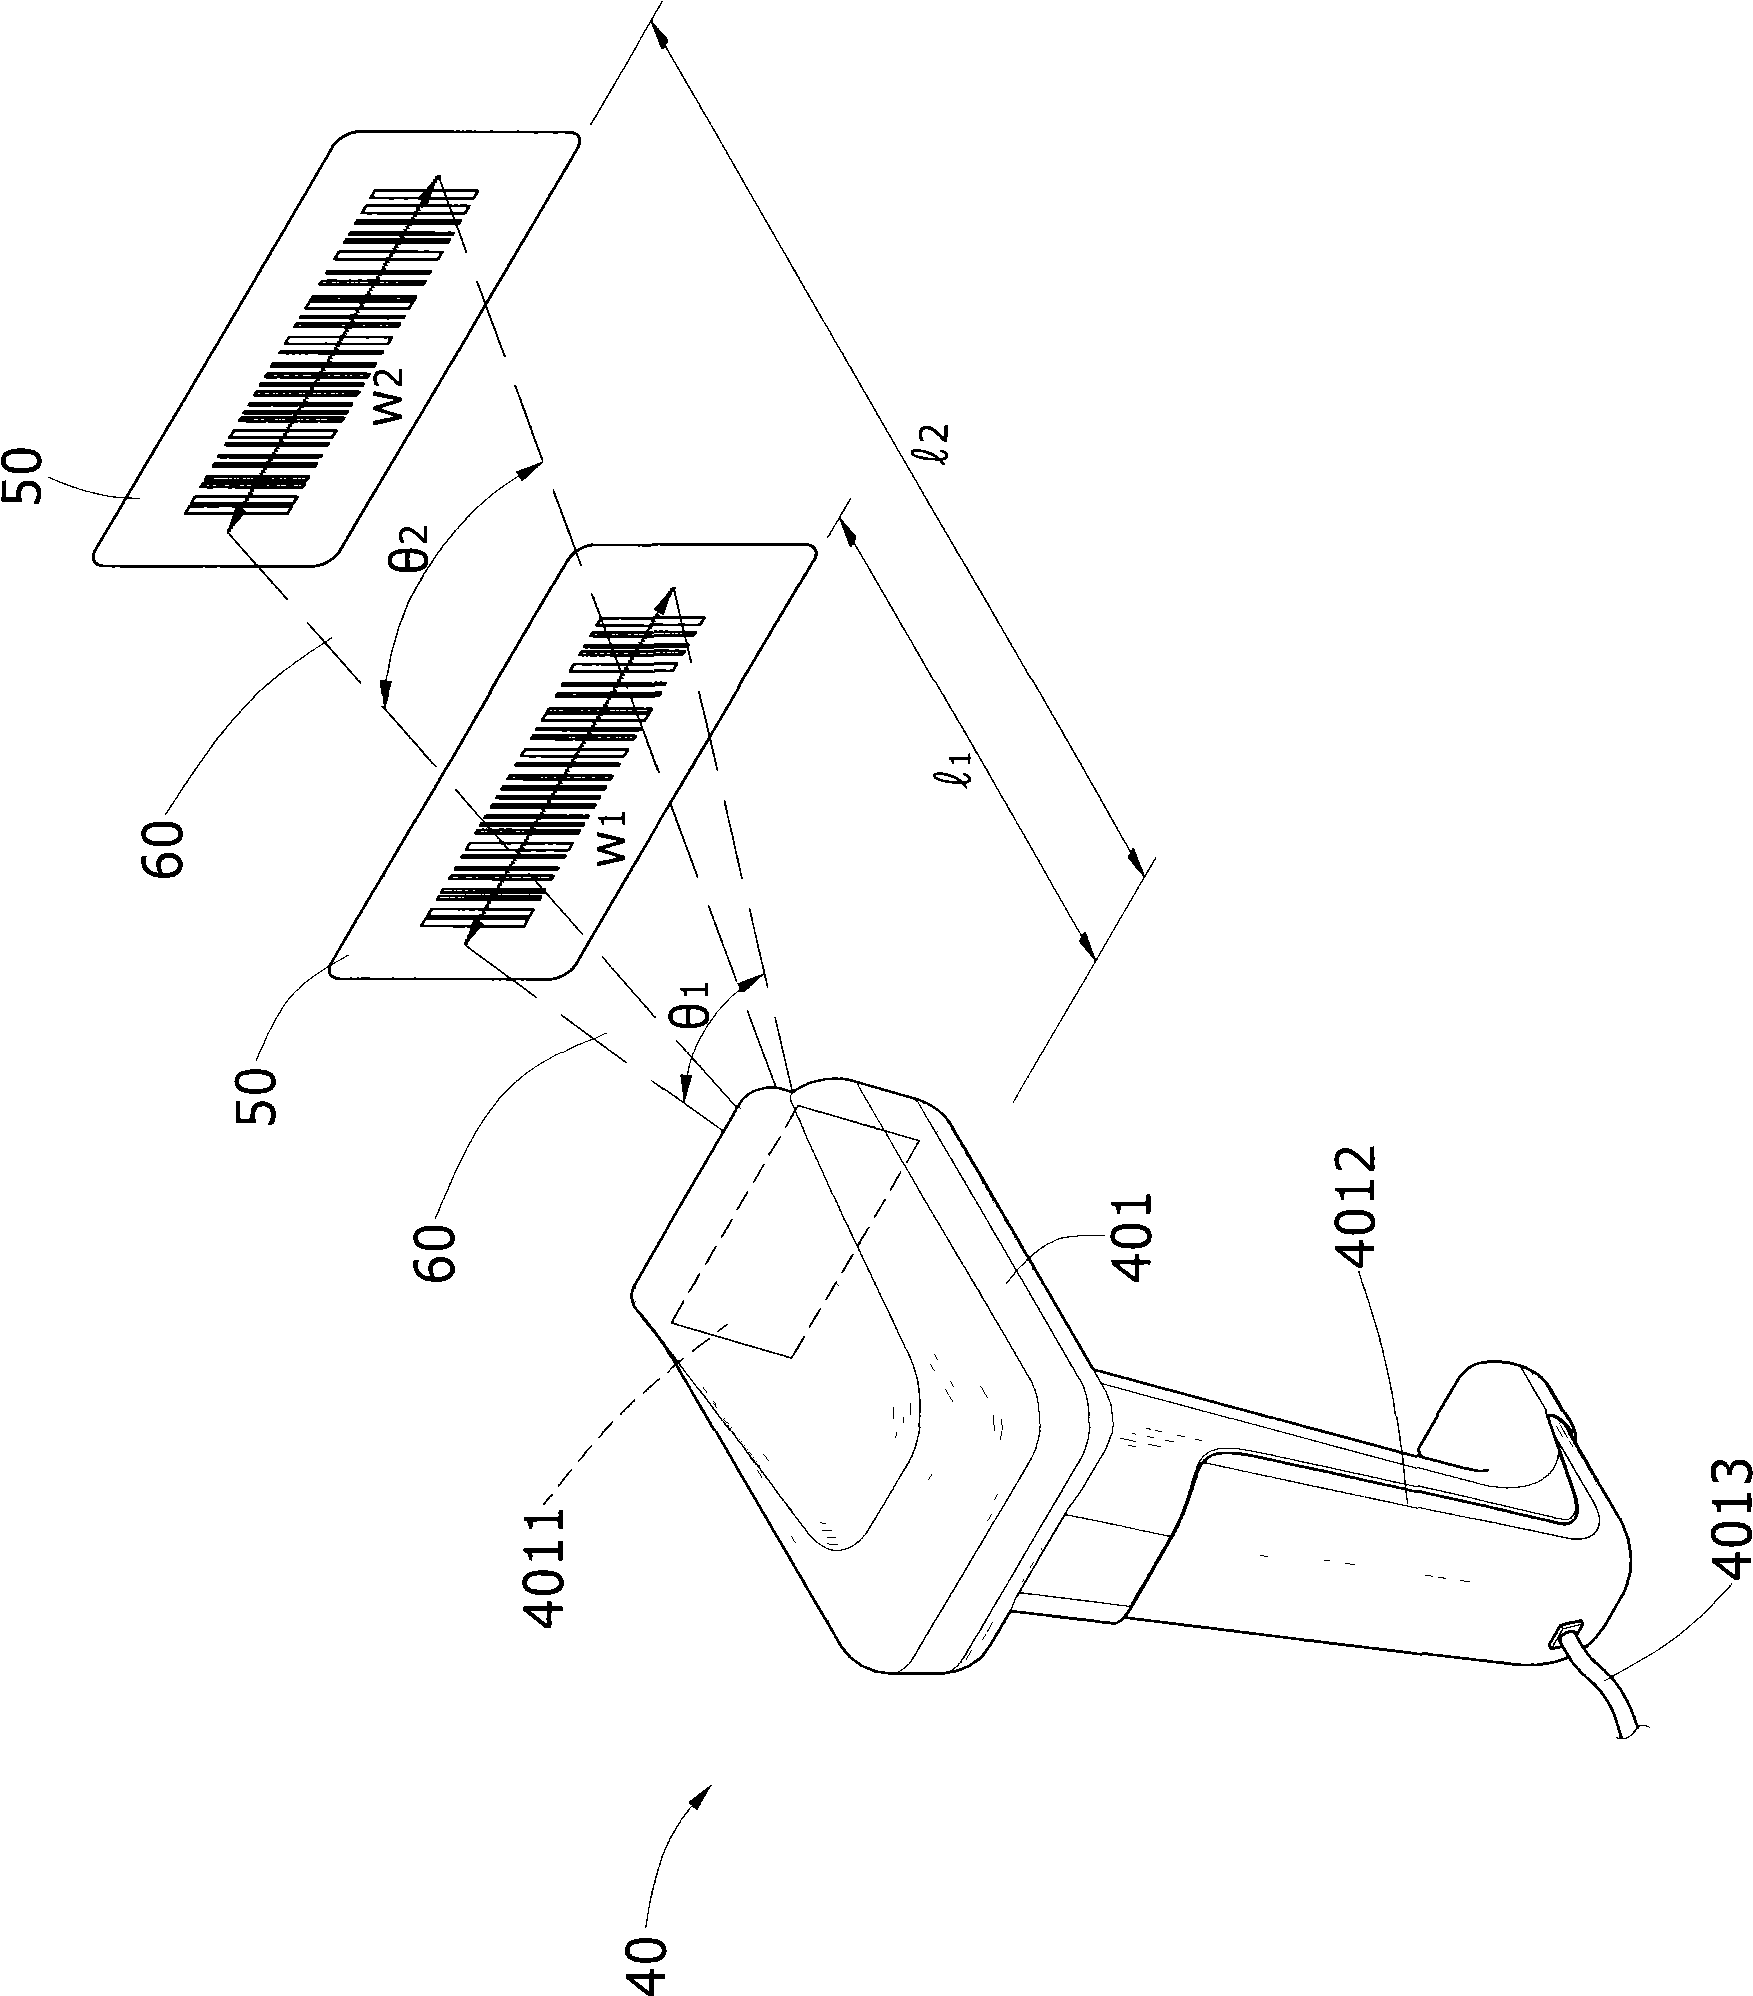 Laser bar code scanner and its execution method